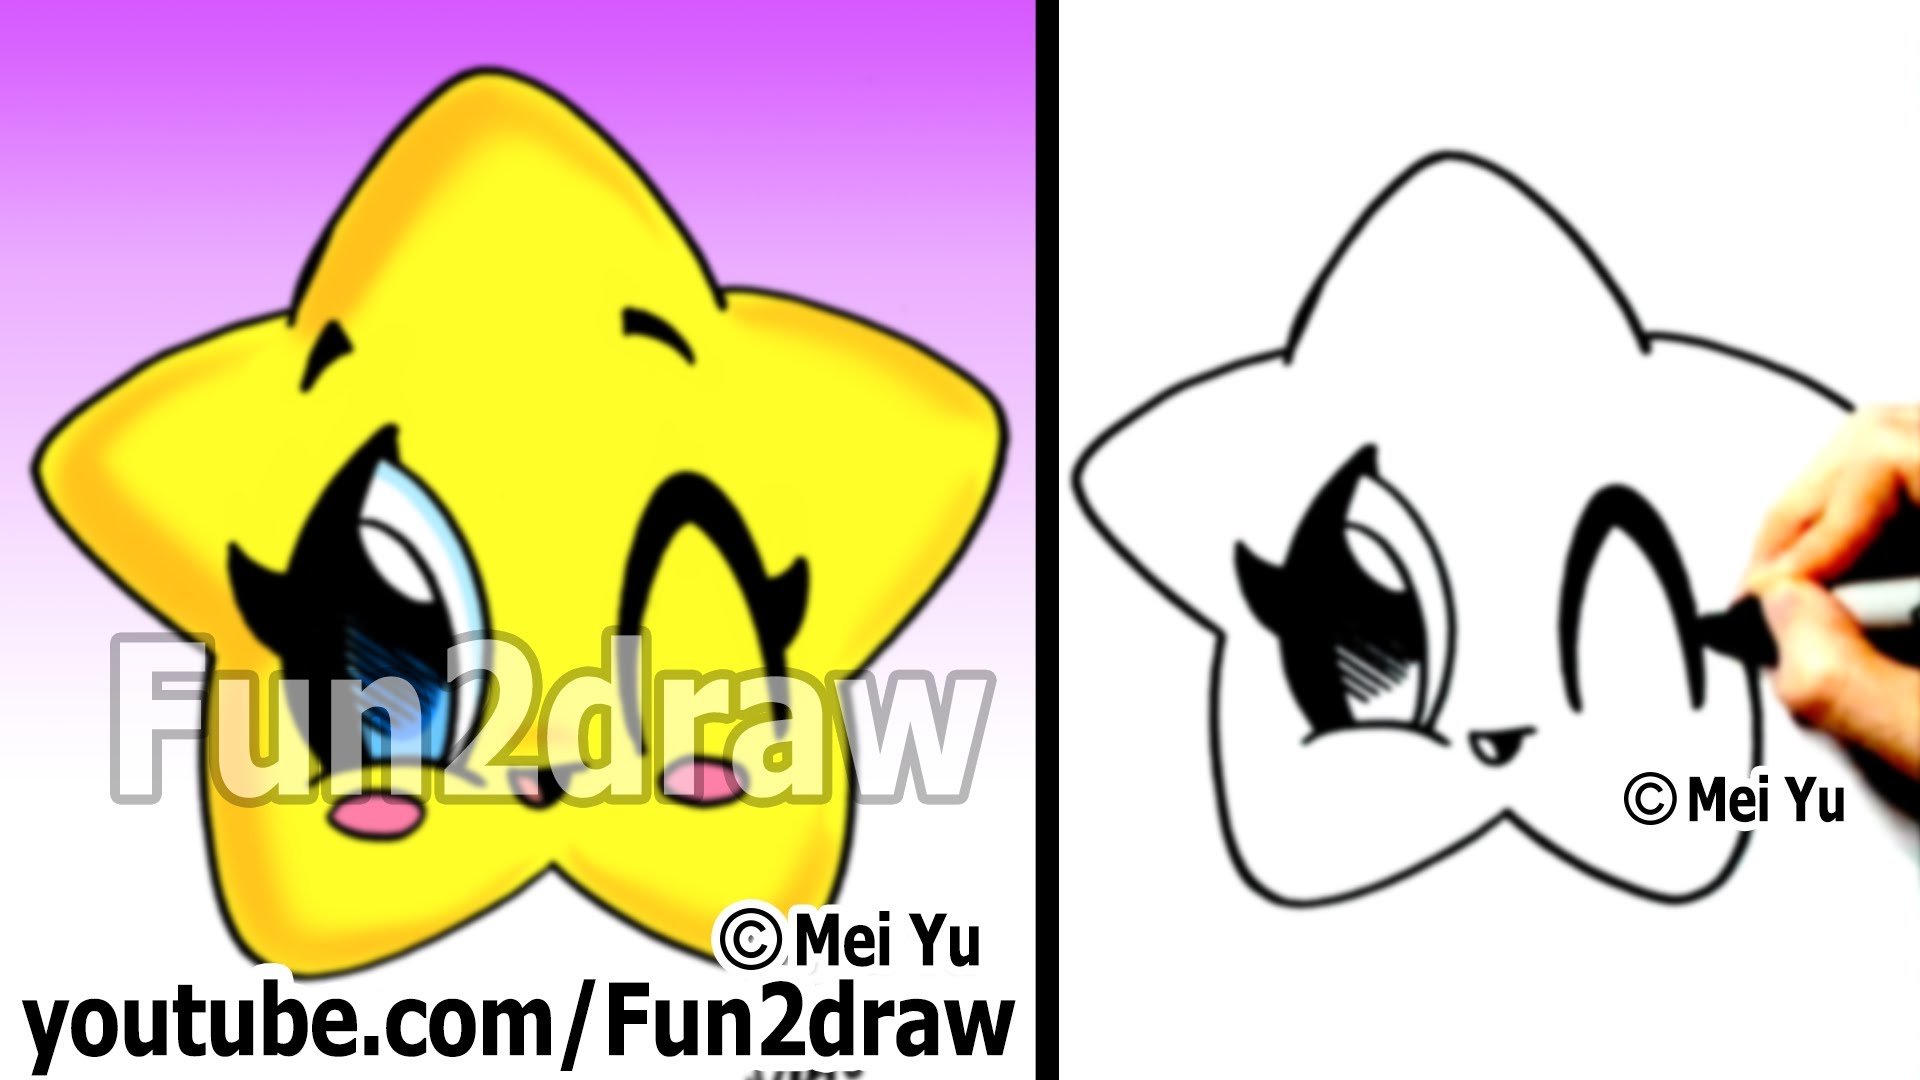 Kawaii Drawings - How to Draw a Star (Easy and Cute!) - Popular ...